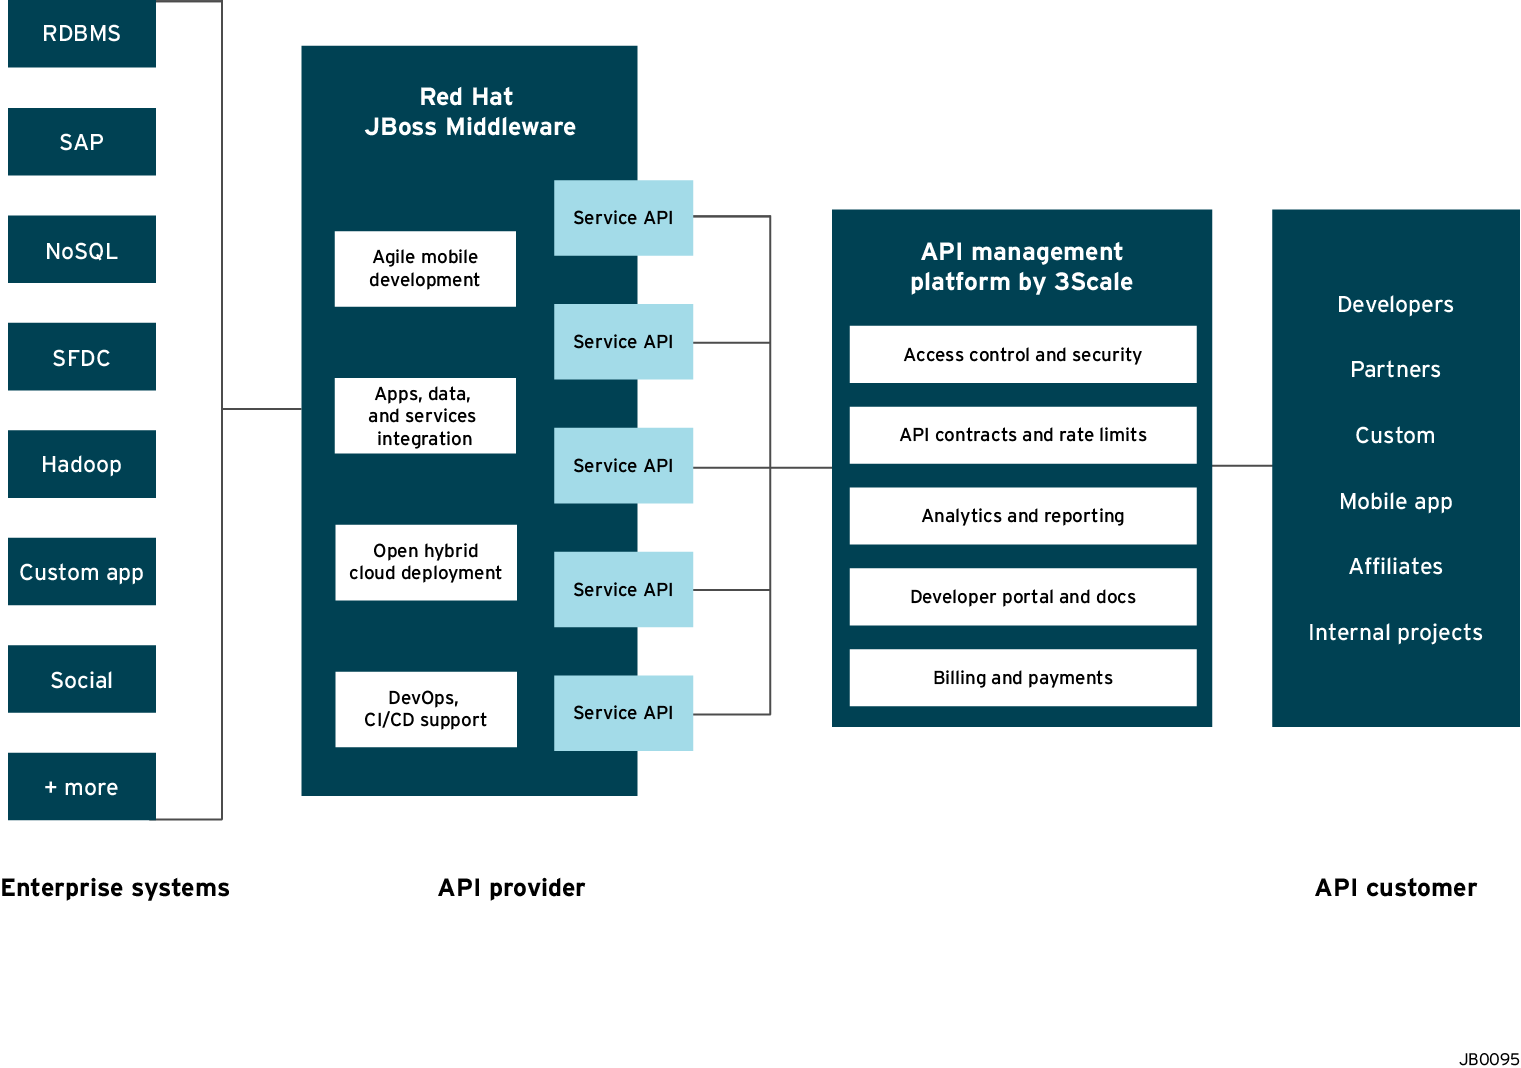 Red Hat and 3scale joint API solution